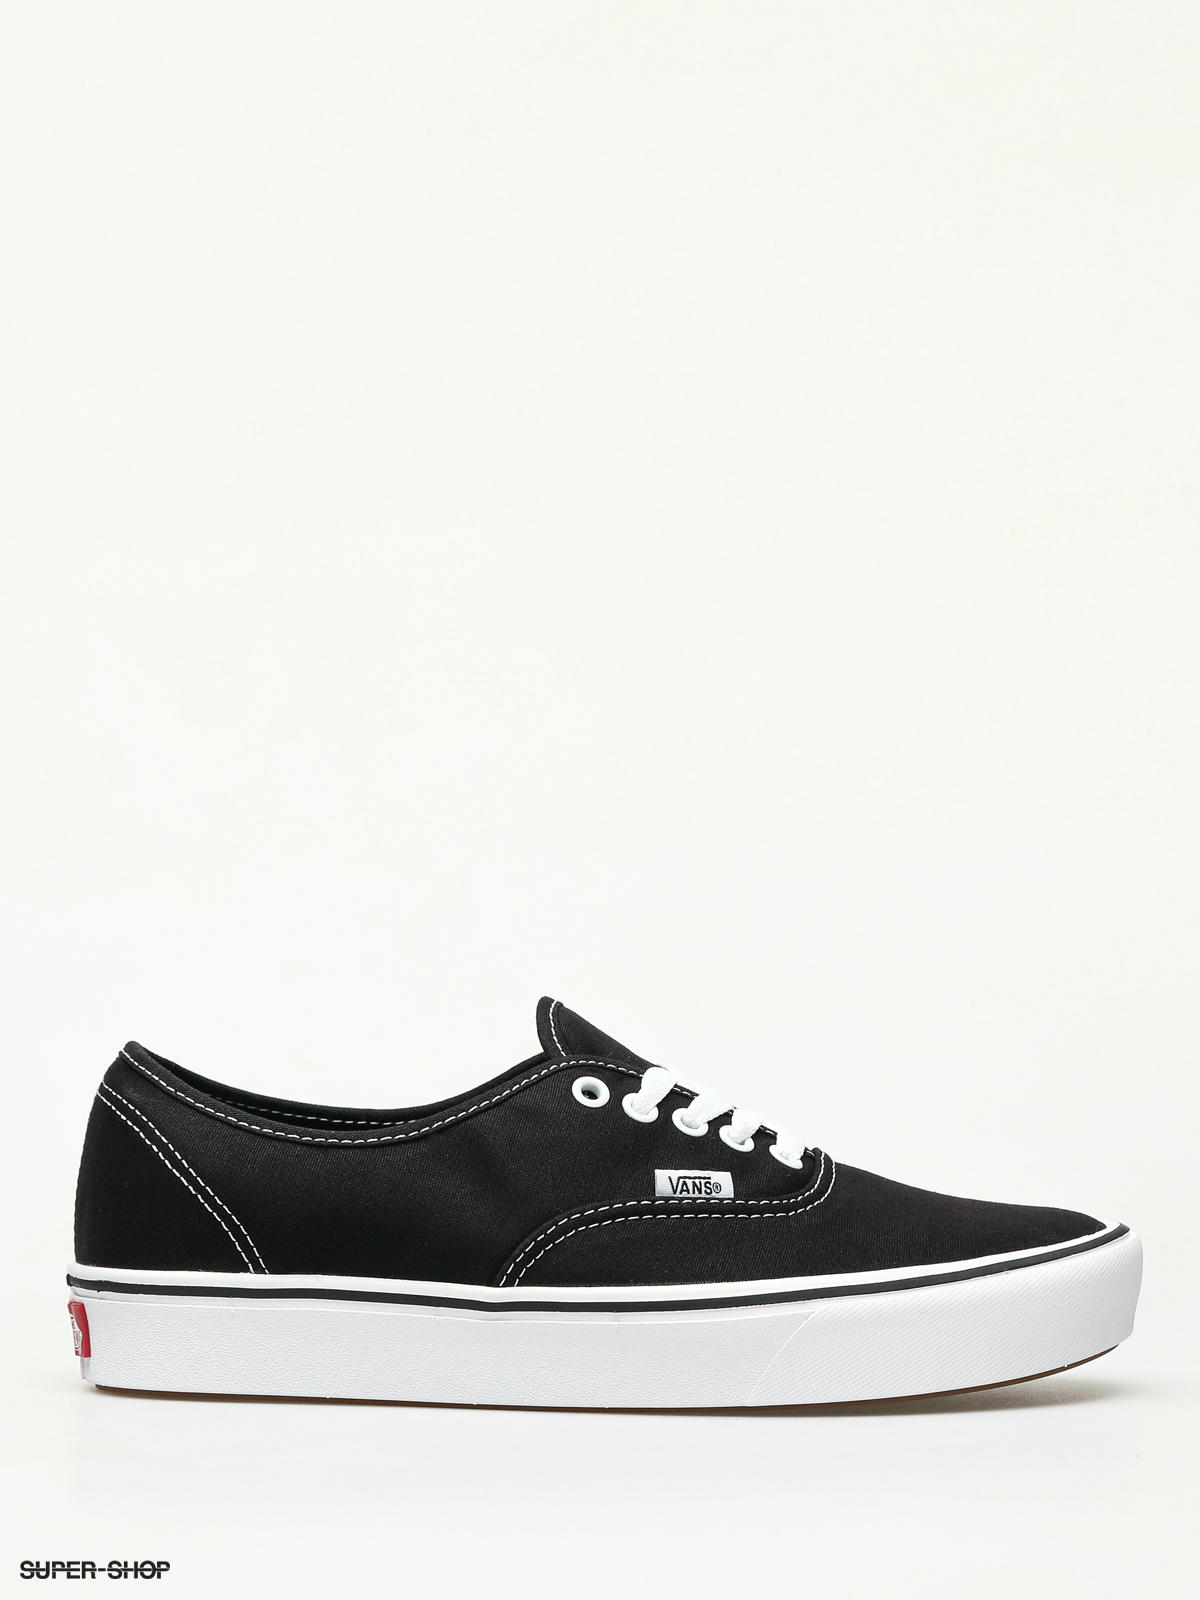 classic black and white vans